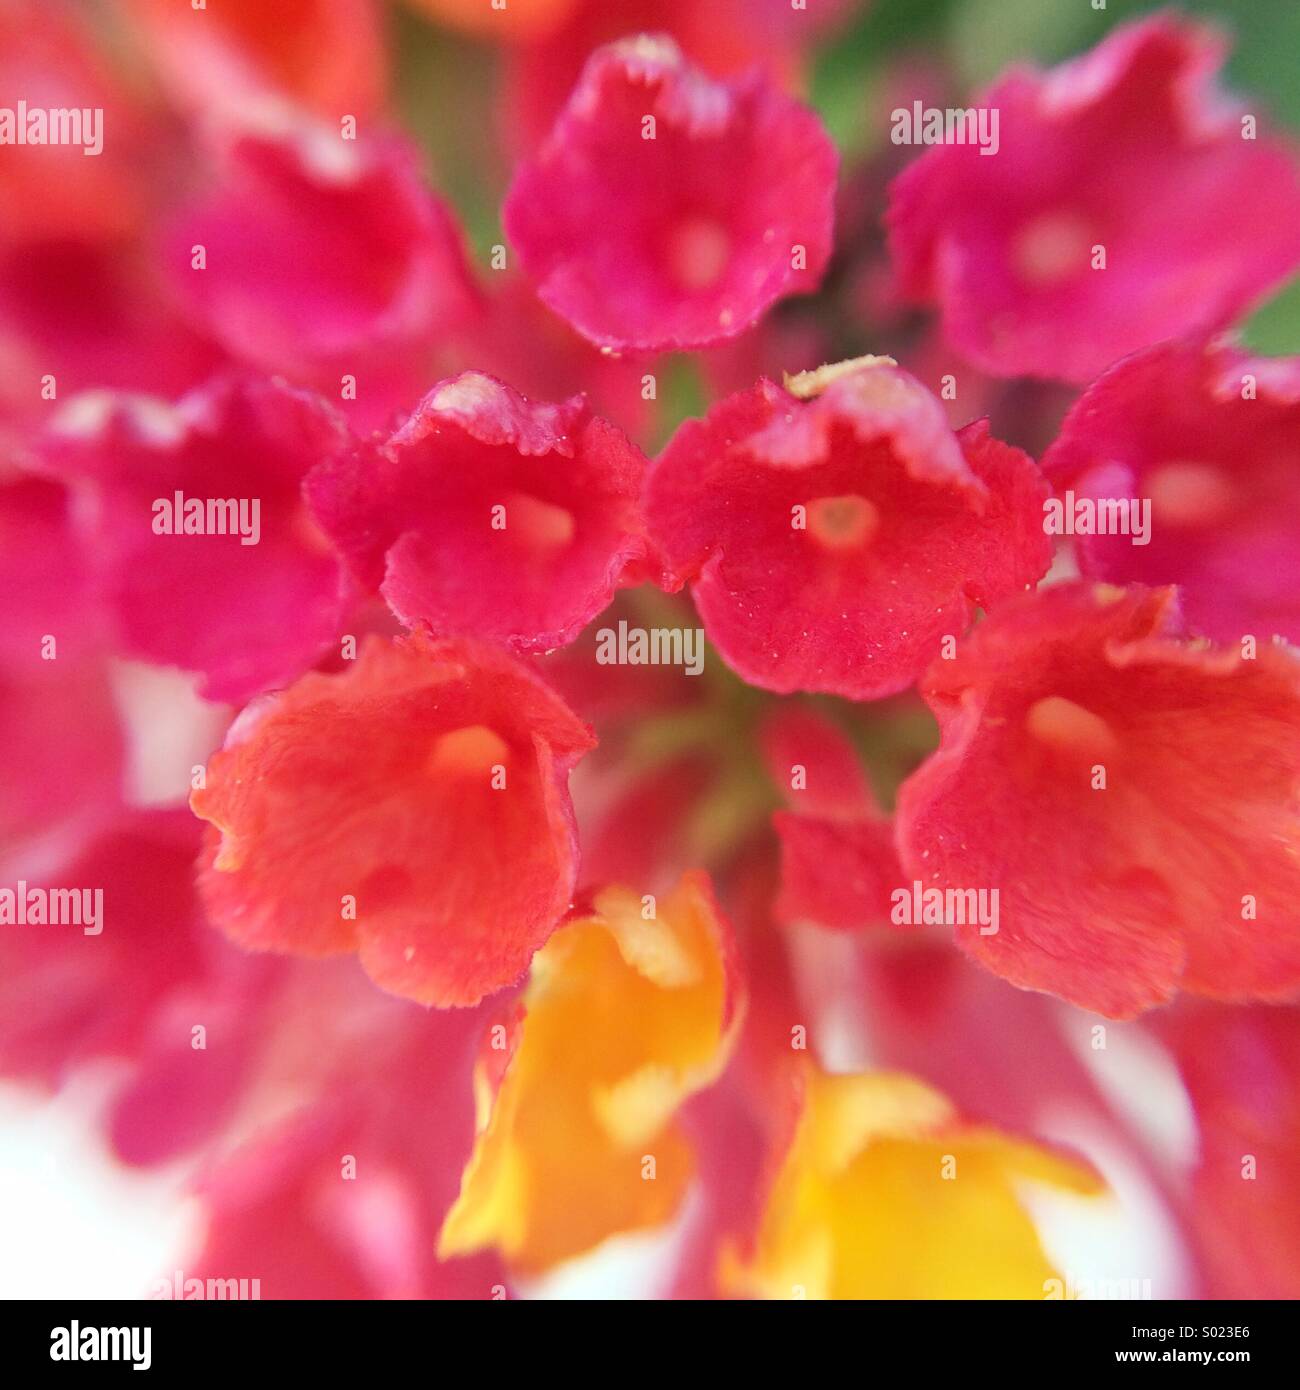 Close up of a flower made of multiple flowers Stock Photo